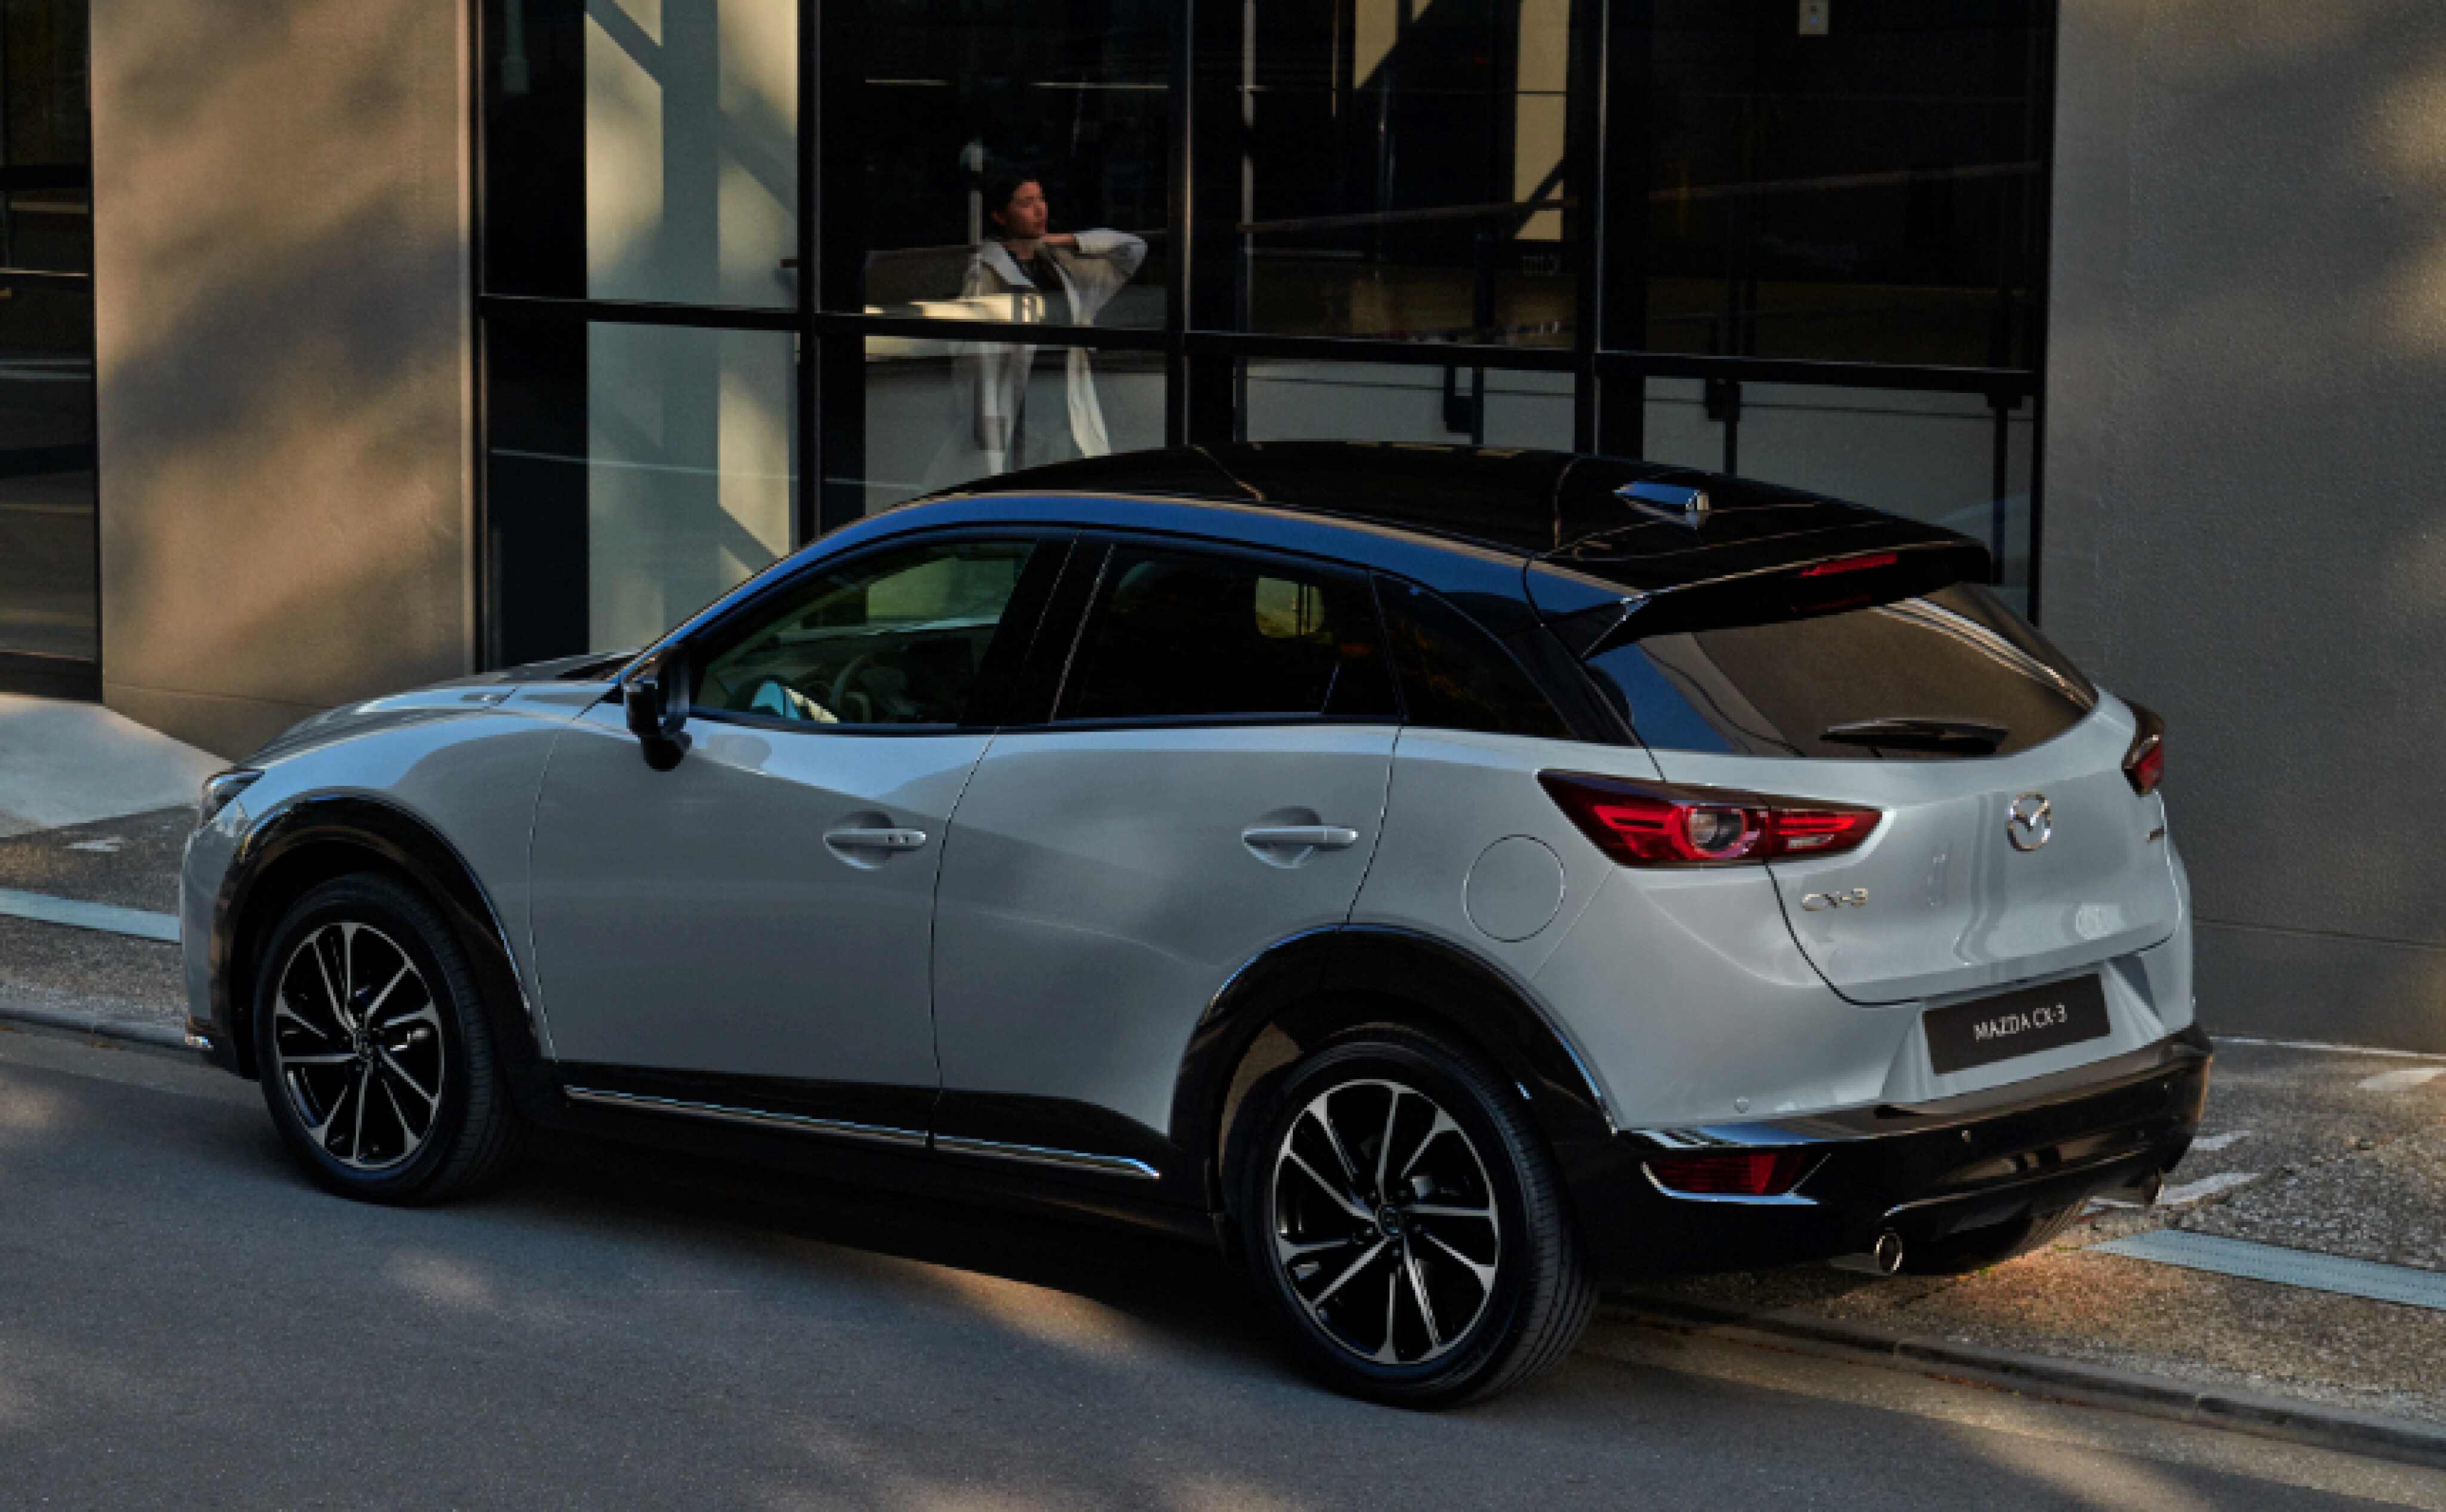 2023 Mazda CX-3 pricing and features: Prices up for updated light SUV